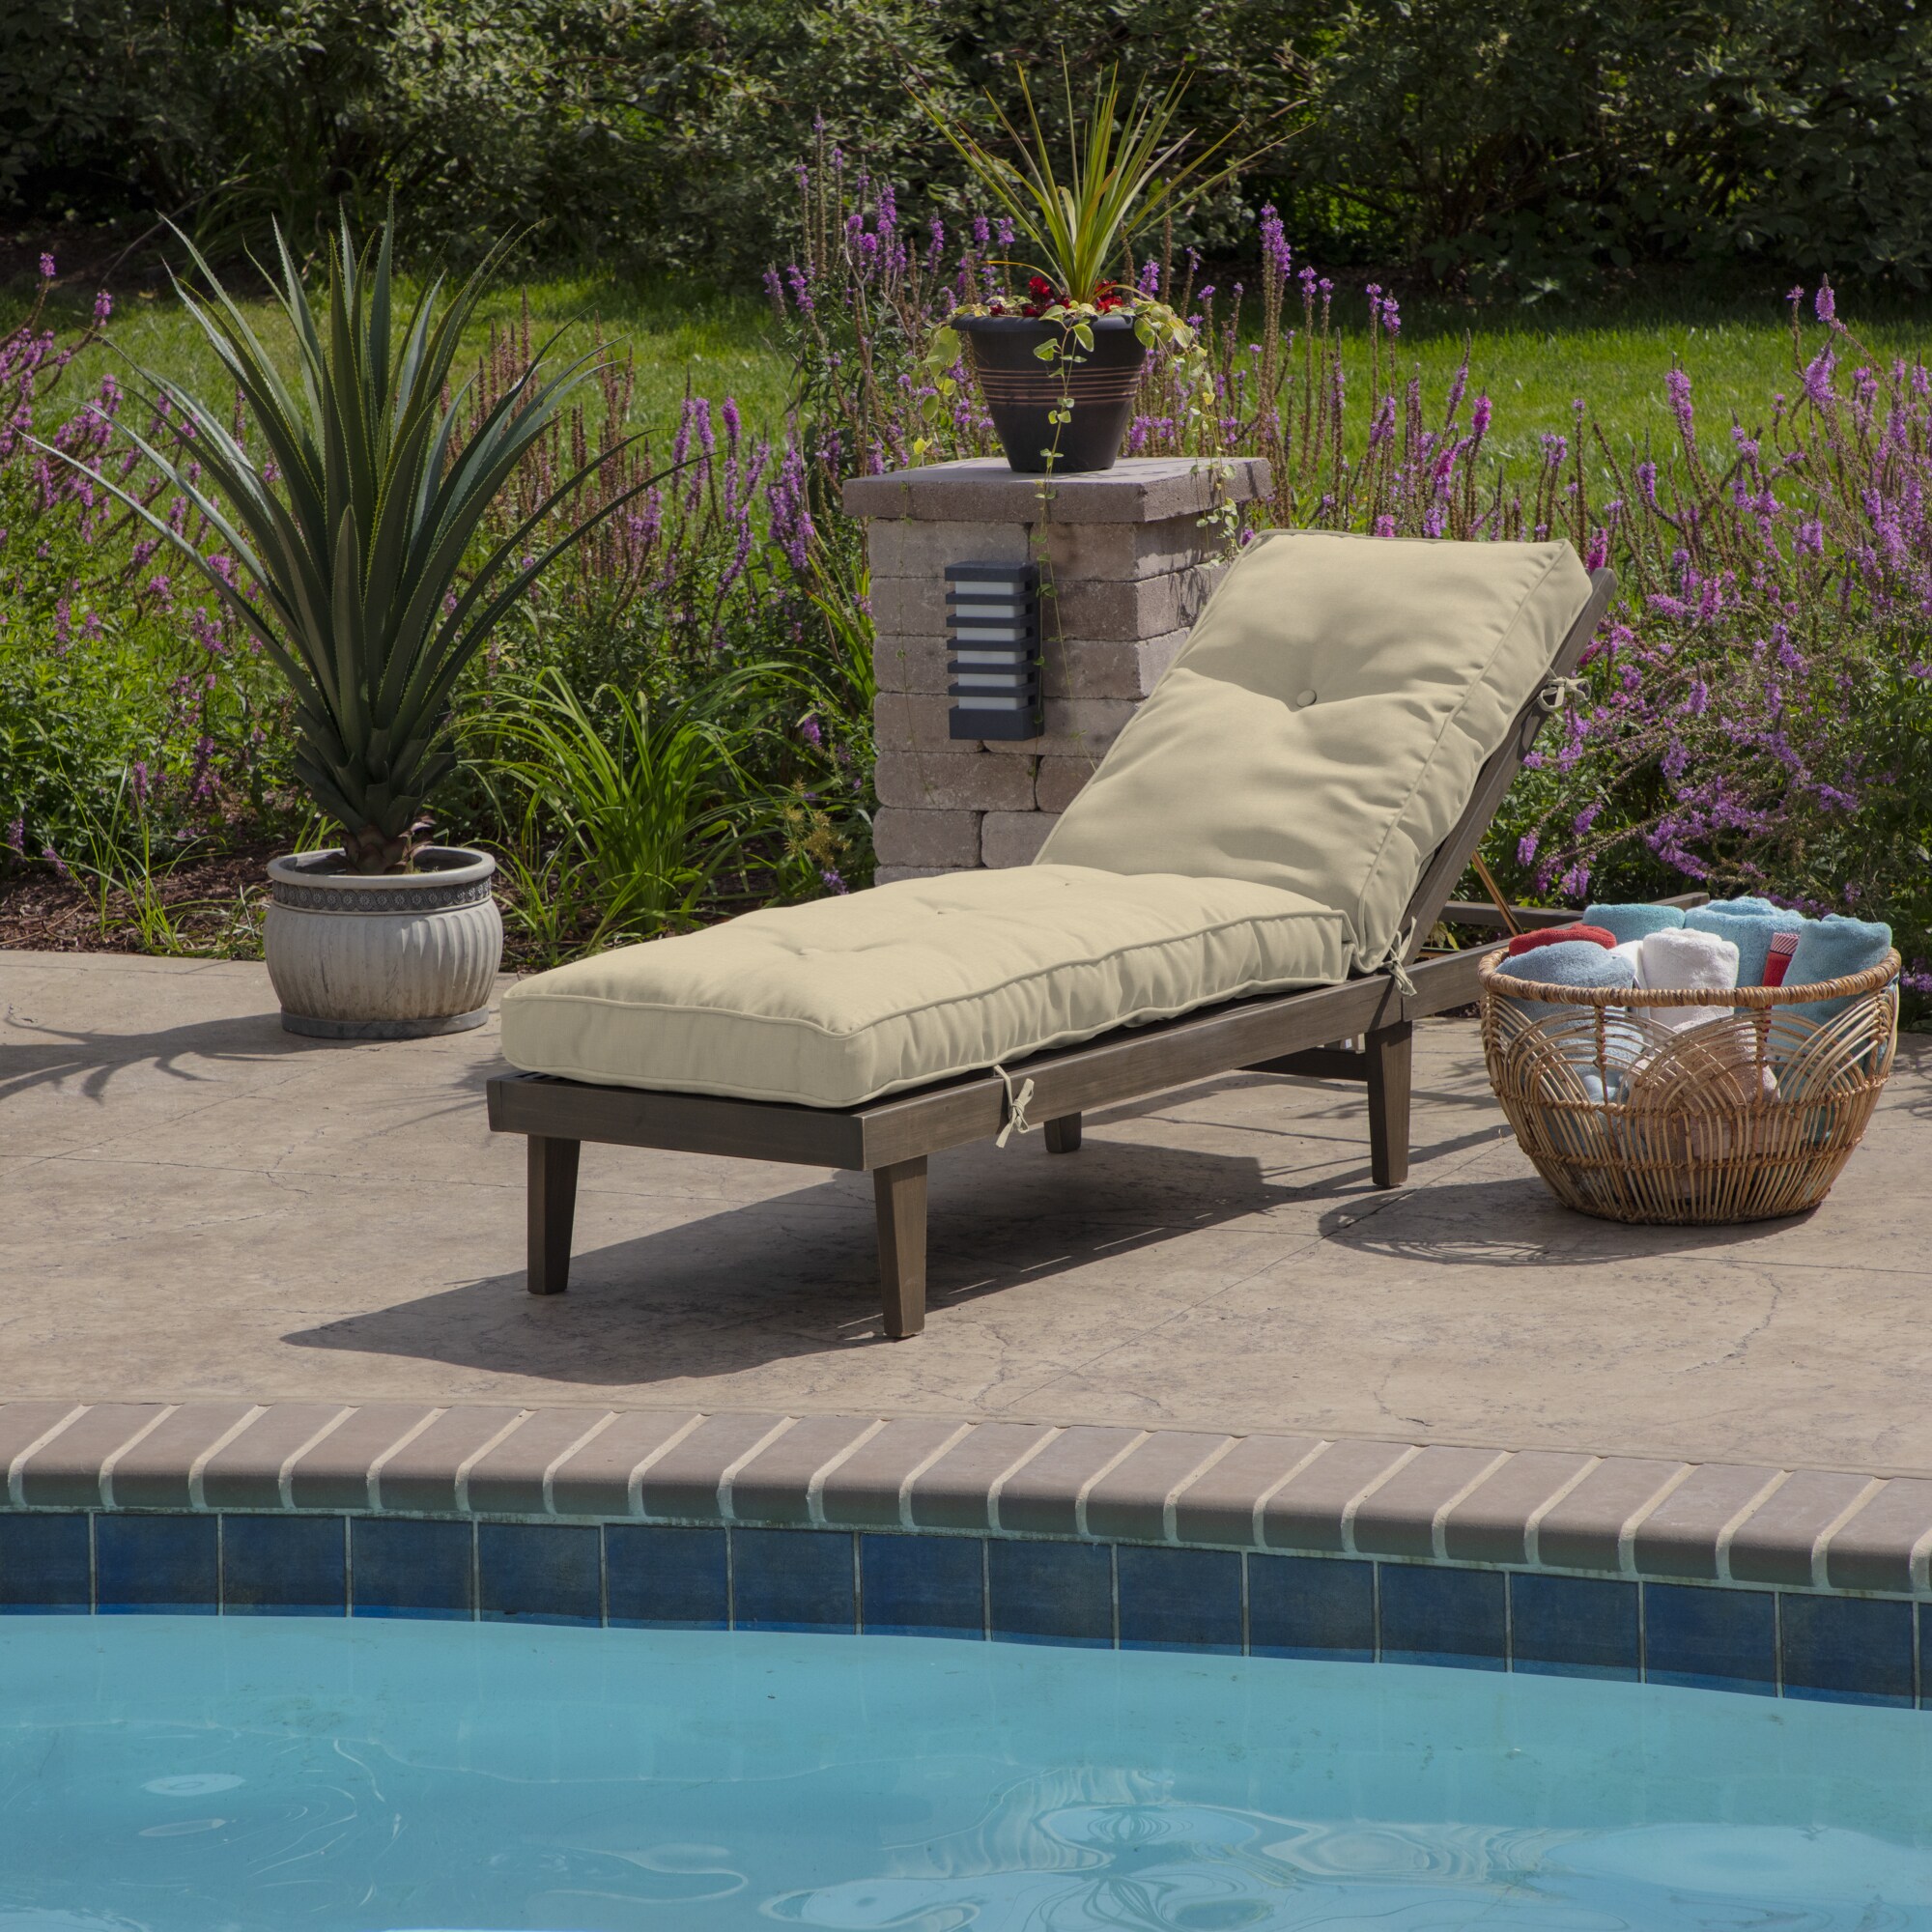 Outdoor Lounge Chair Cushion Tufted Deck Chaise Padding Fleece Pool Recliner Mat 